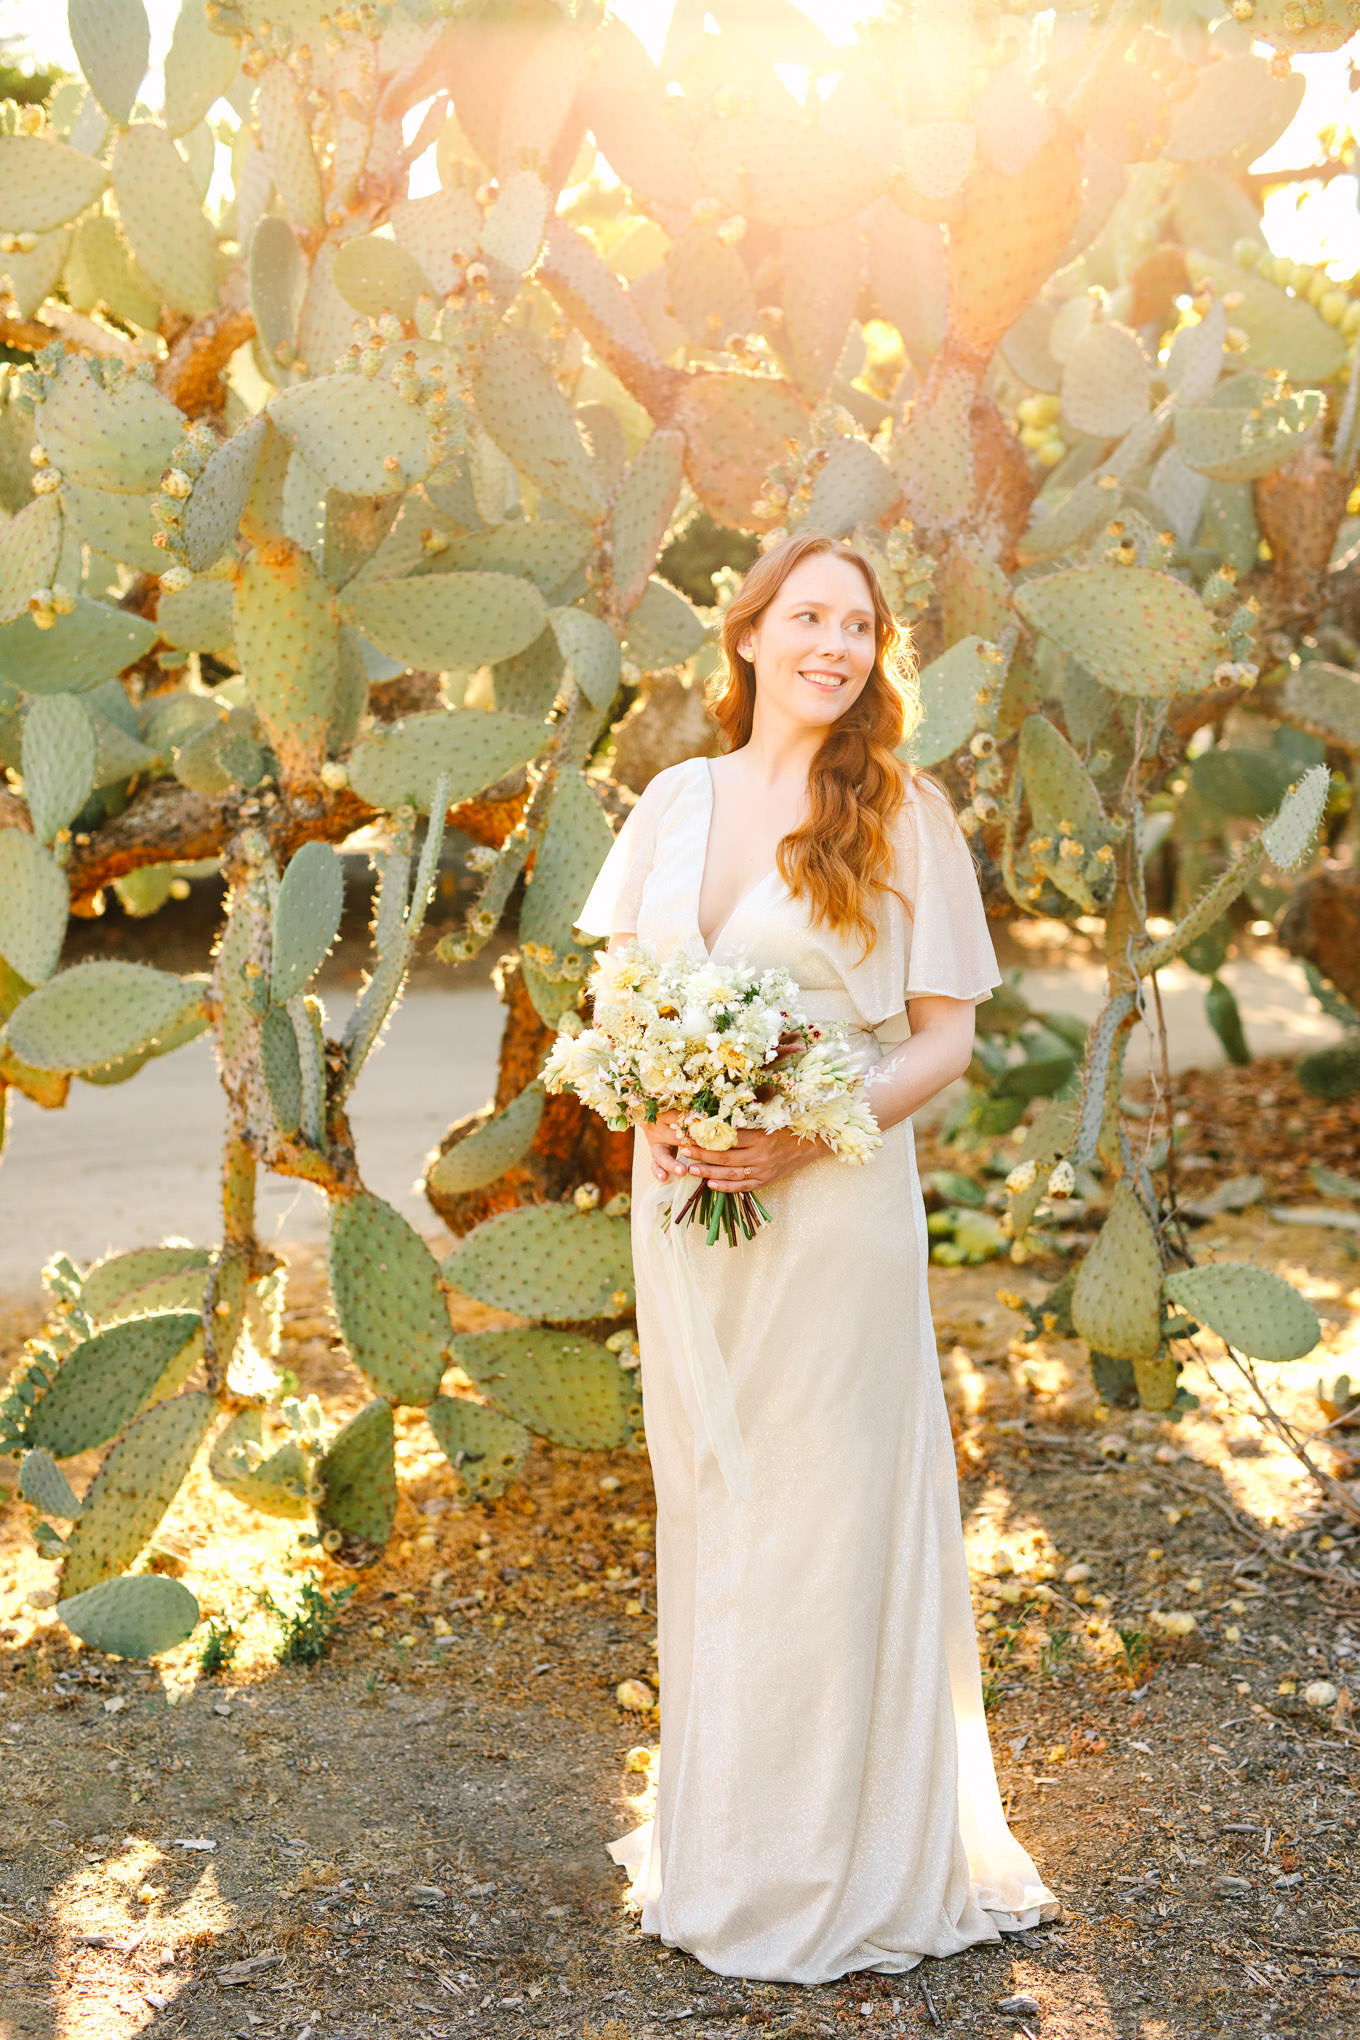 Bride in Jenny Yoo v-neck dress in front of cacti plants | Los Angeles Arboretum Elopement | Colorful and elevated wedding photography for fun-loving couples in Southern California | #LosAngelesElopement #elopement #LAarboretum #LAskyline #elopementphotos   Source: Mary Costa Photography | Los Angeles